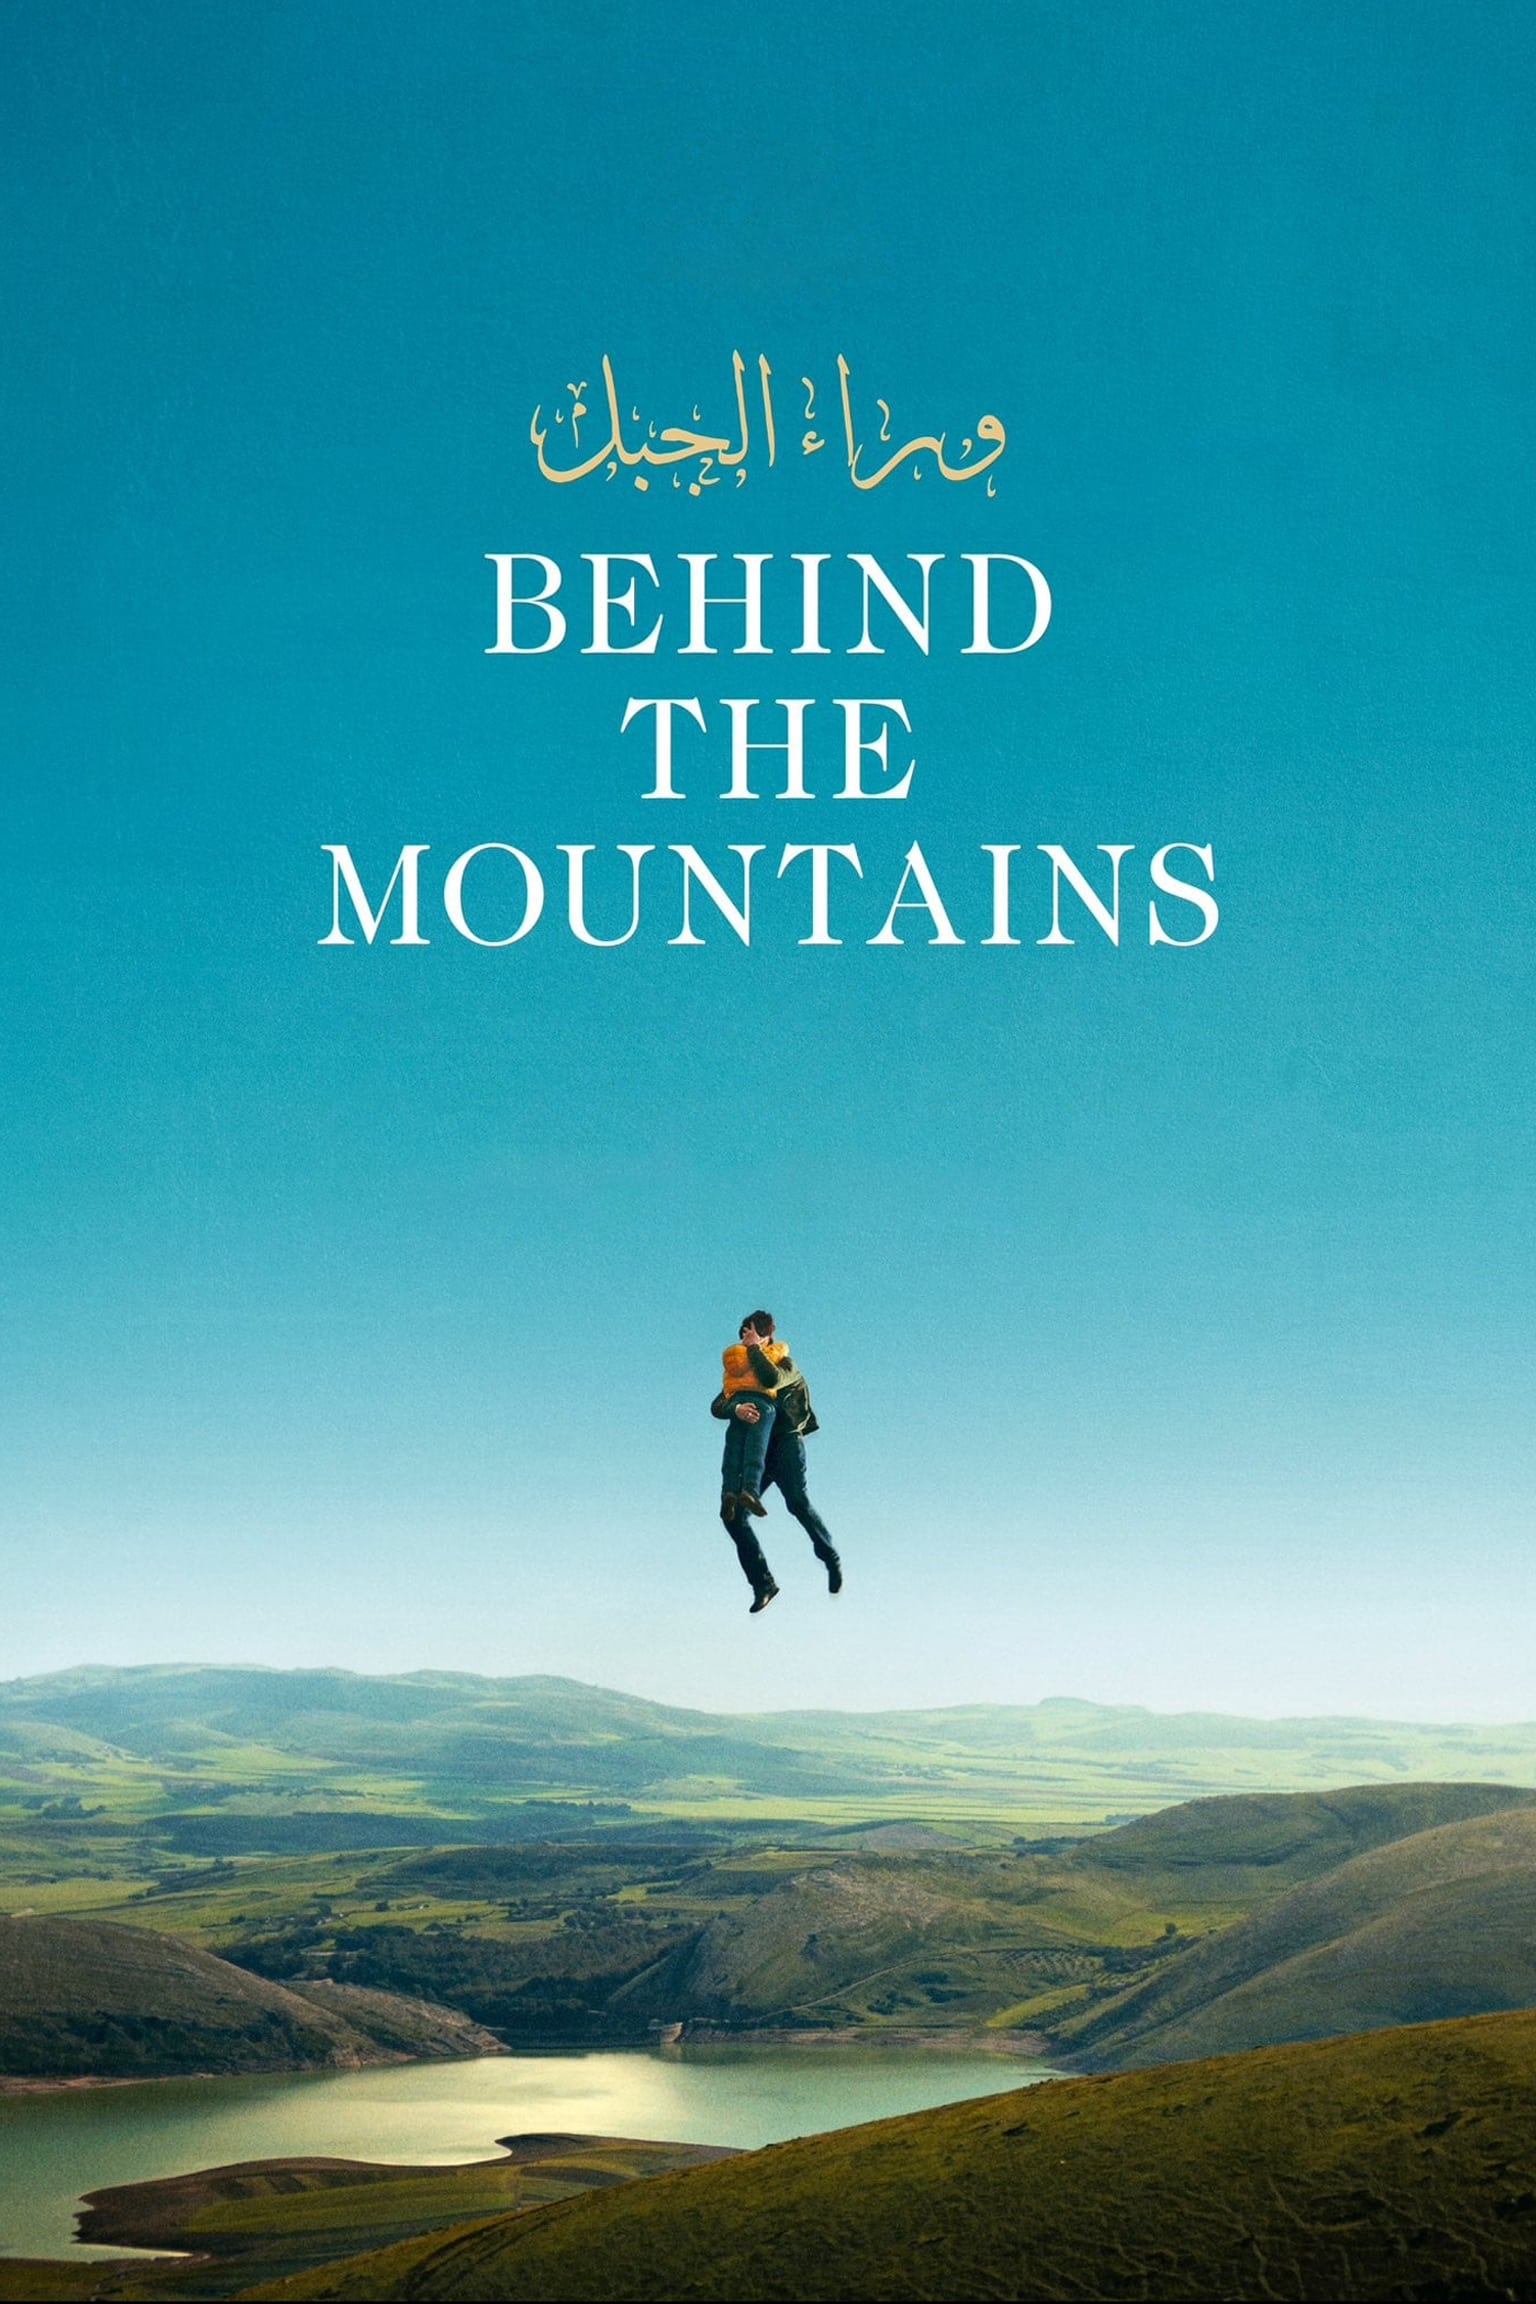 Poster for the movie "Behind the Mountains"